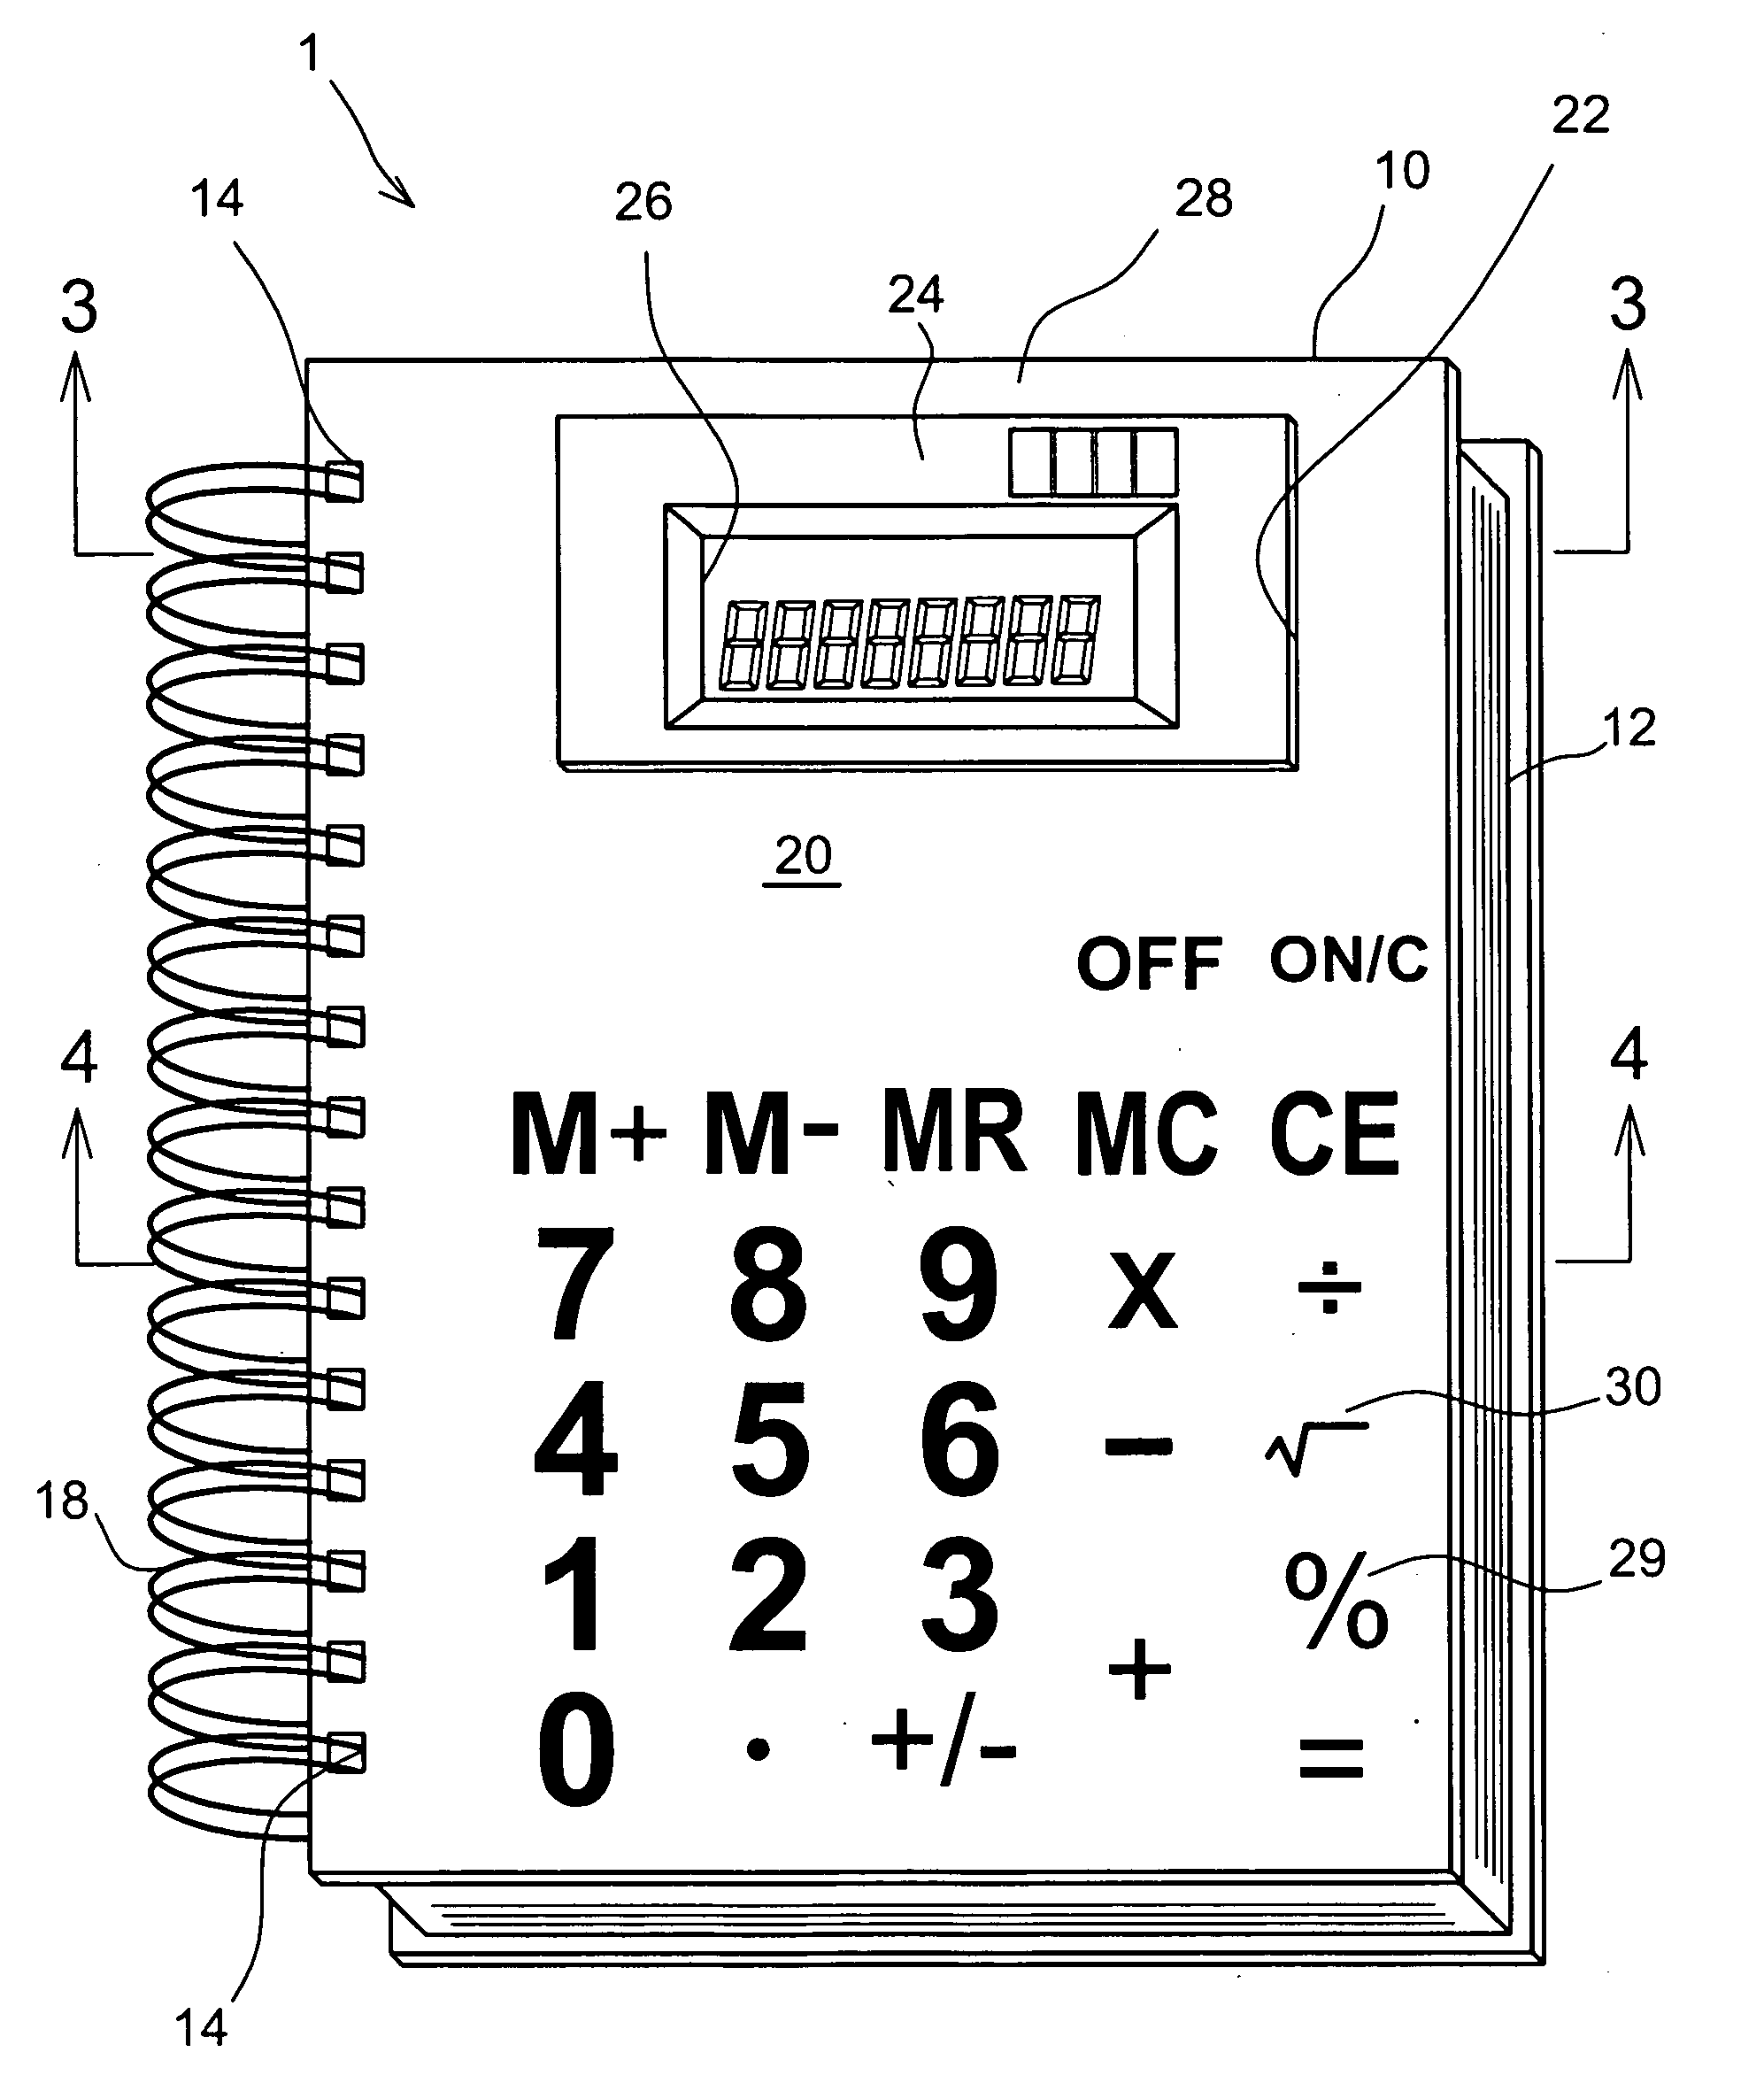 Electronic book cover